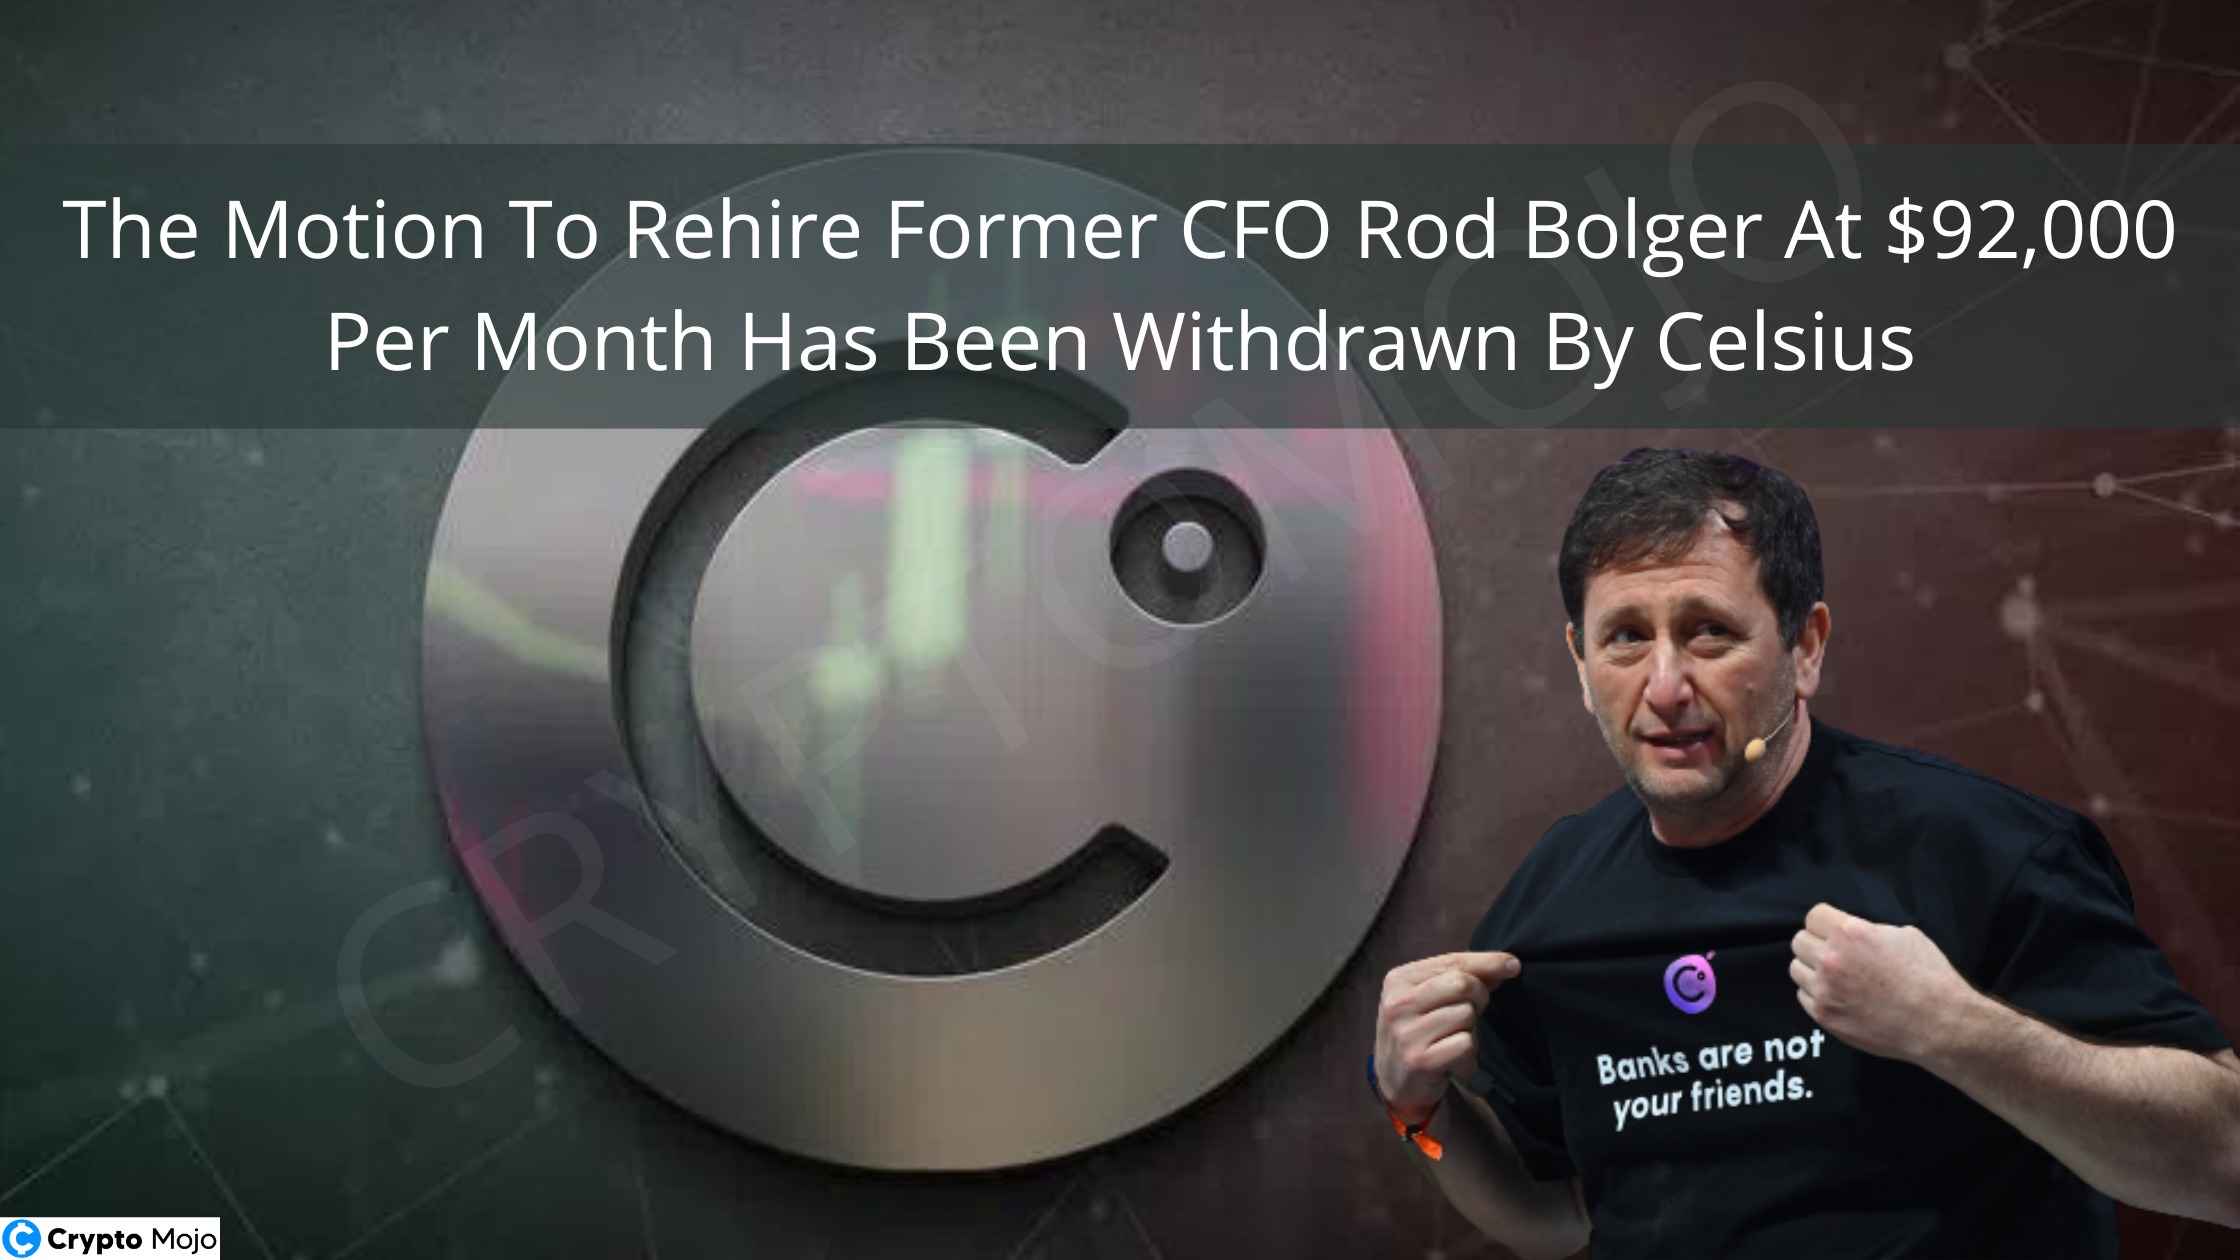 The Motion To Rehire Former CFO Rod Bolger At $92,000 Per Month Has Been Withdrawn By Celsius!